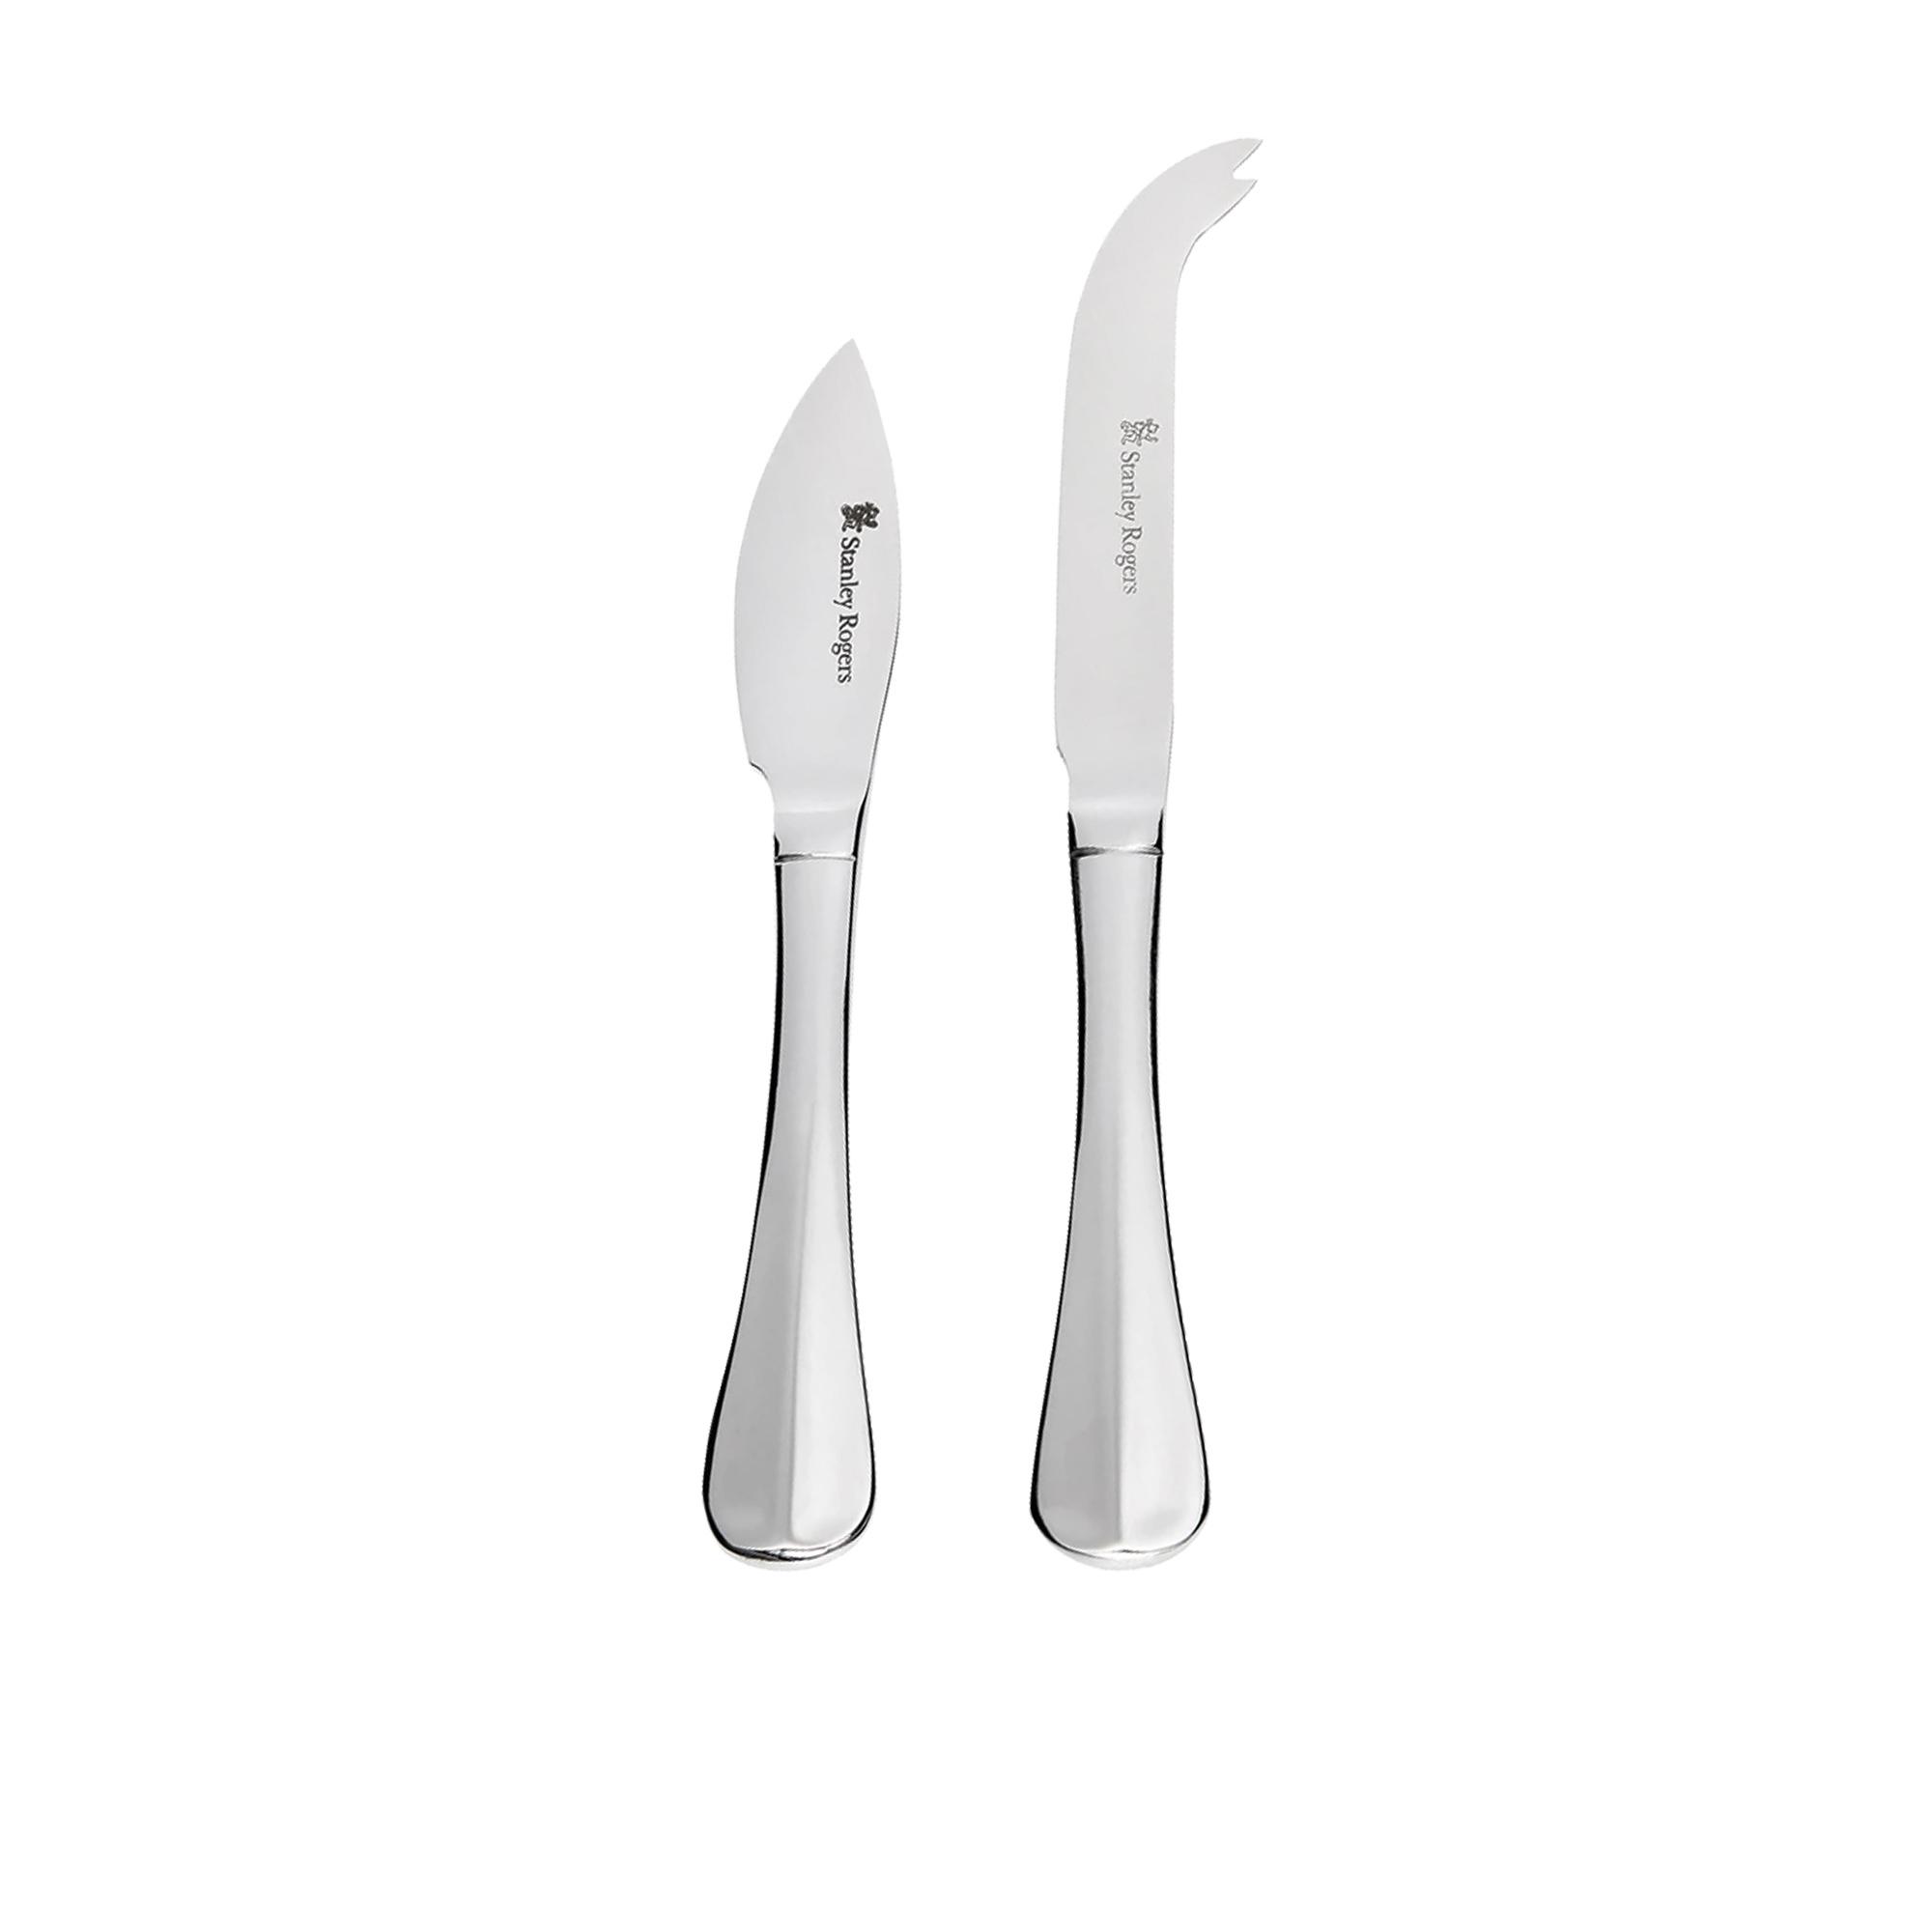 Stanley Rogers Baguette Cheese Knife Set 2pc Image 1